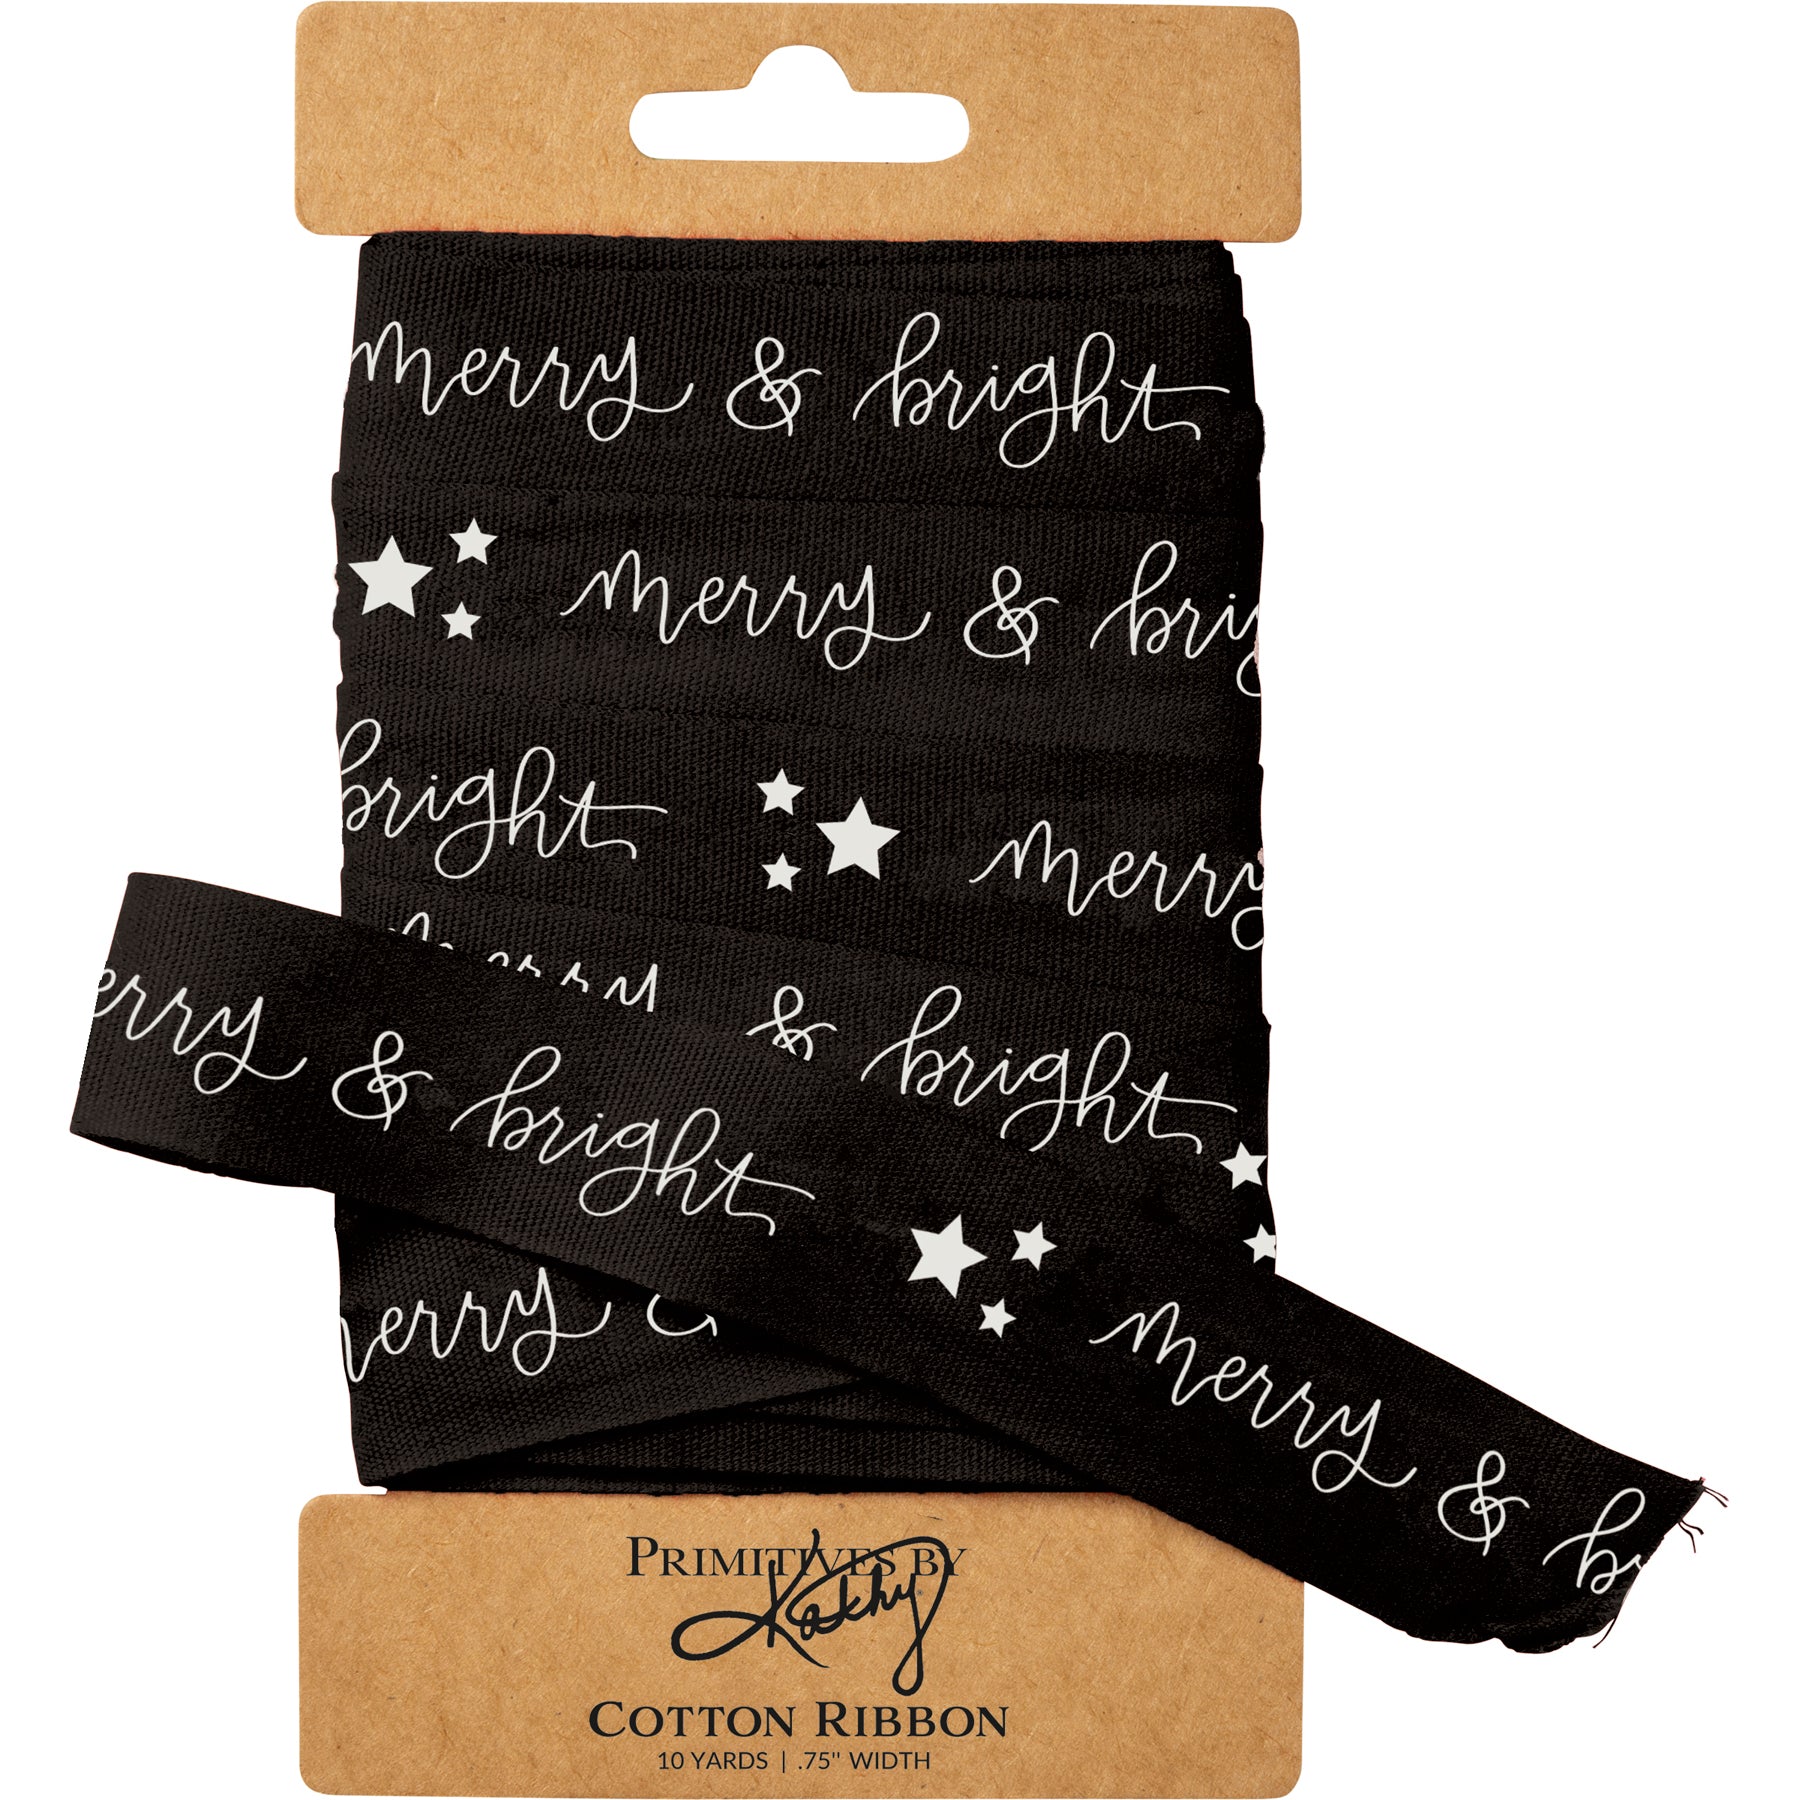 The Canton Christmas Shop Merry & Bright Cotton Ribbon from Primitives by Kathy